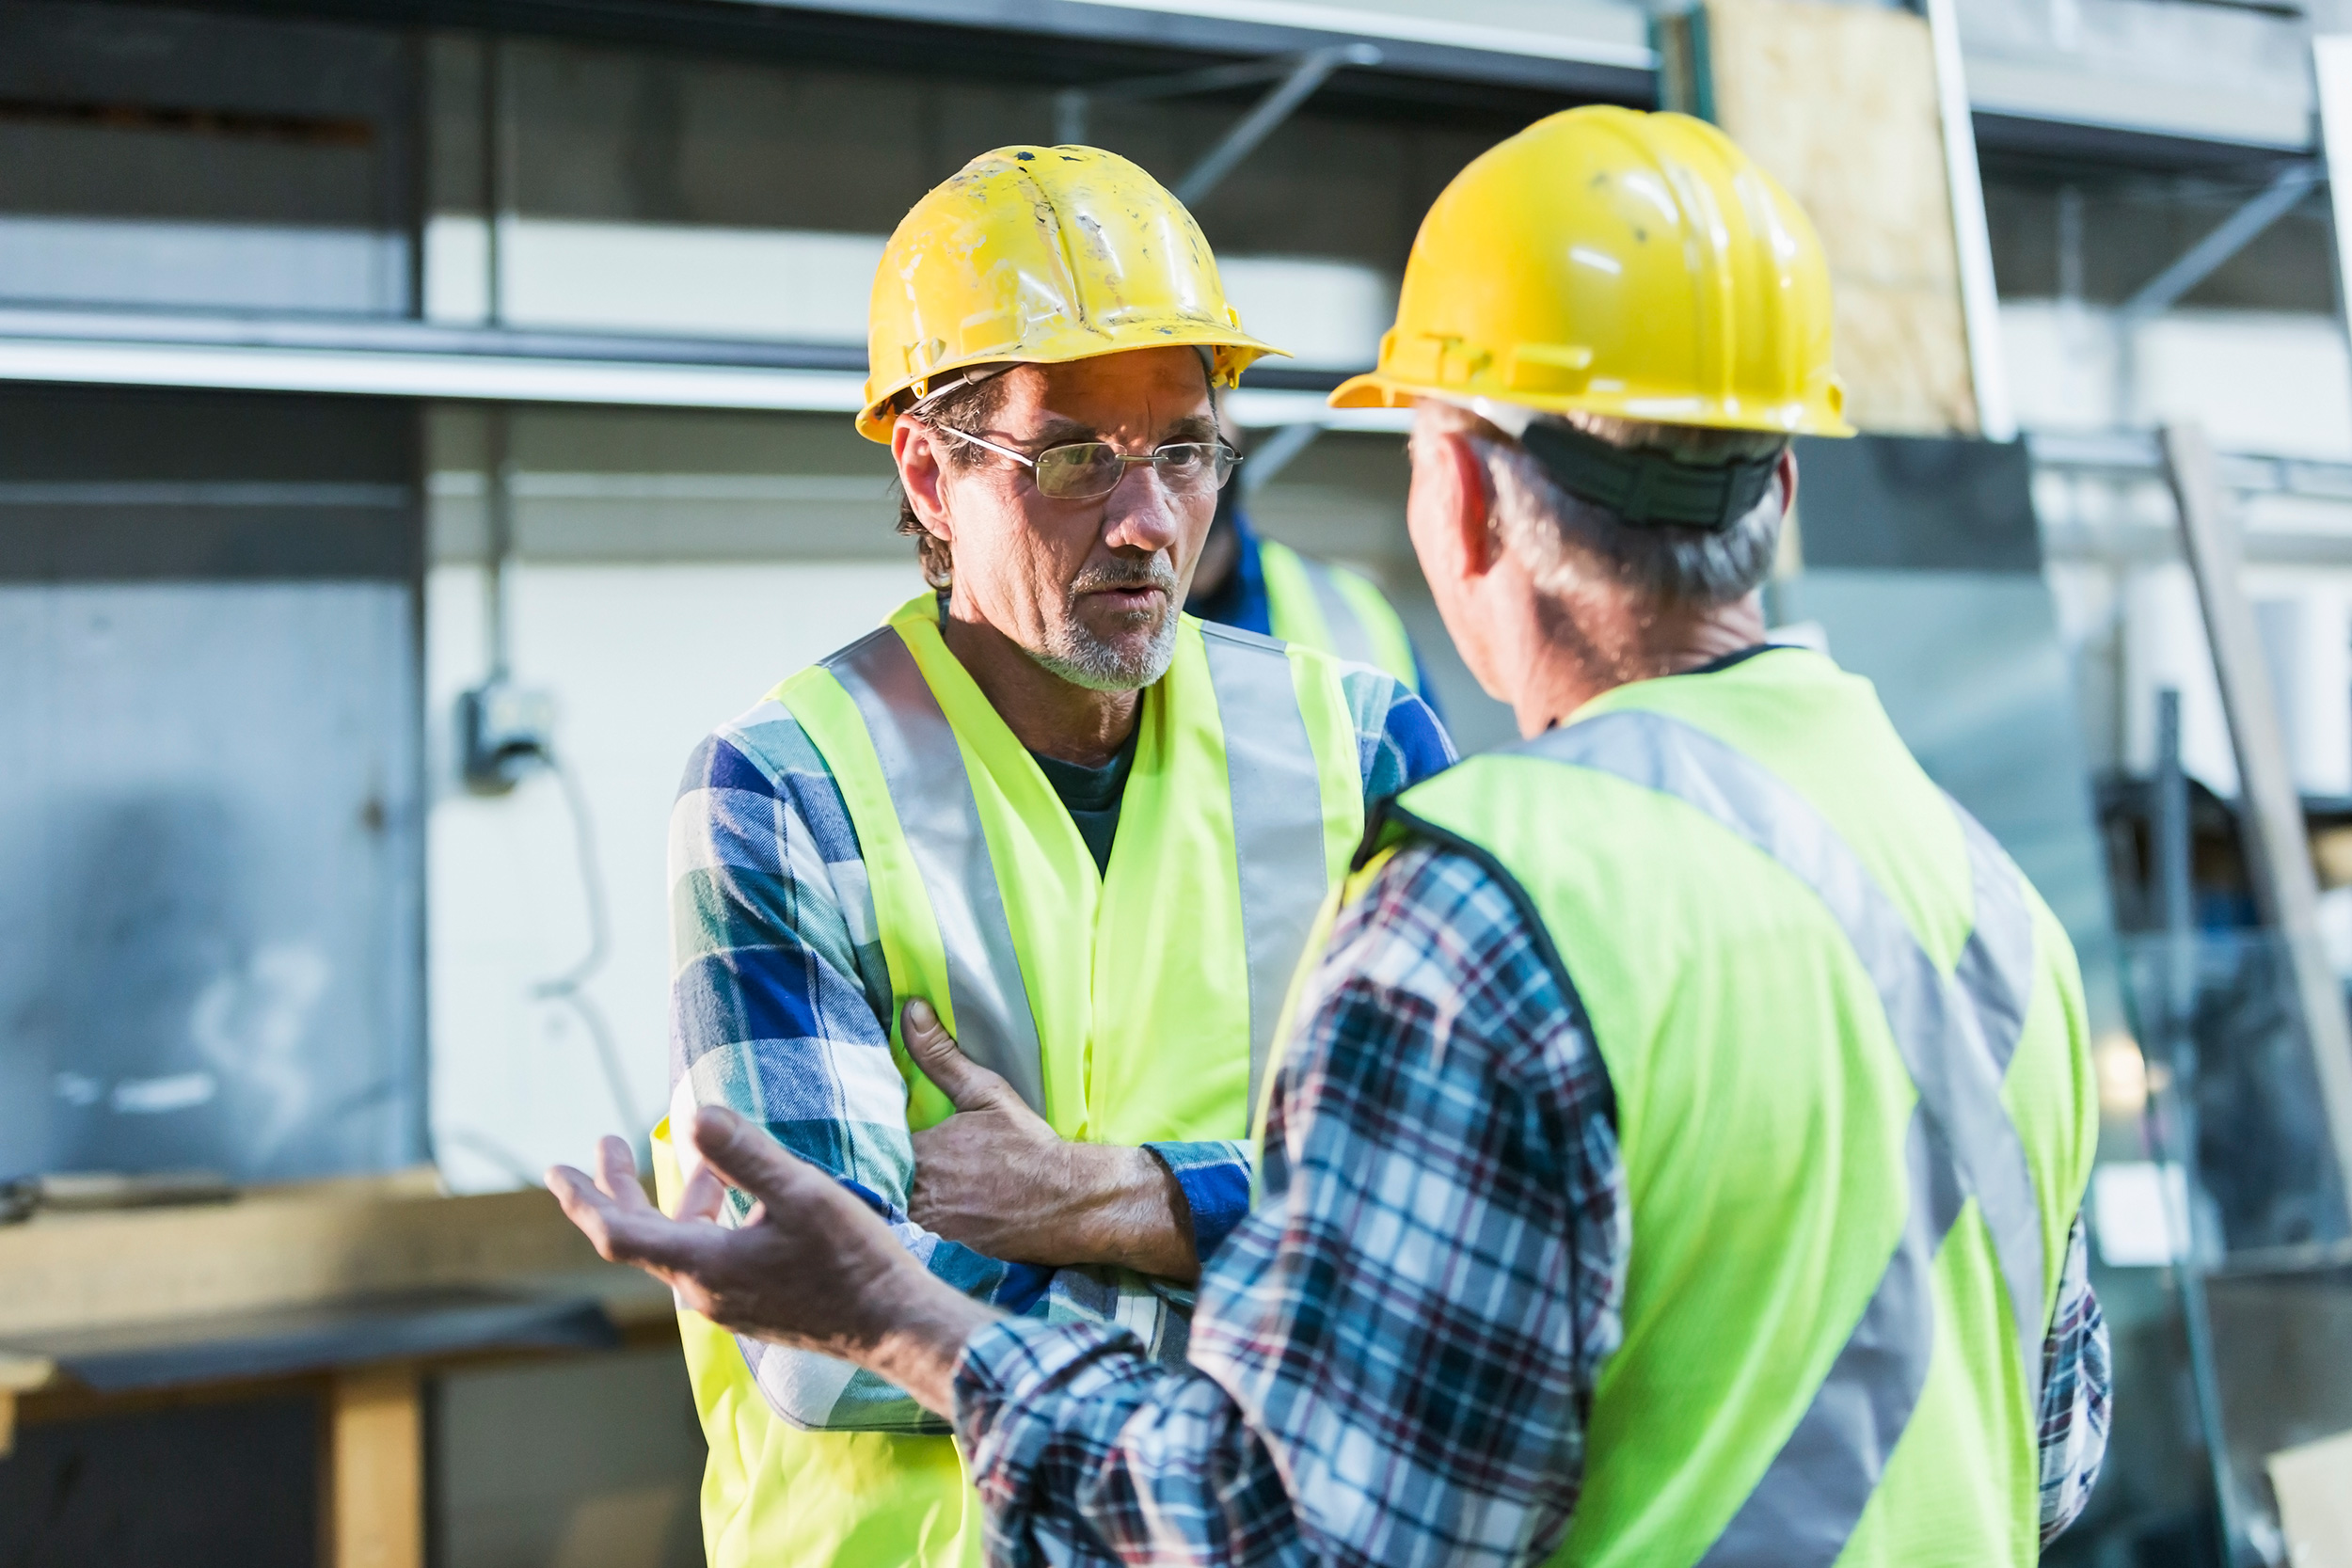 Two men wearing safety vests and hard hats talk to each other on a work site. The qualifications to get SSI disability benefits and SSDI befits vary.